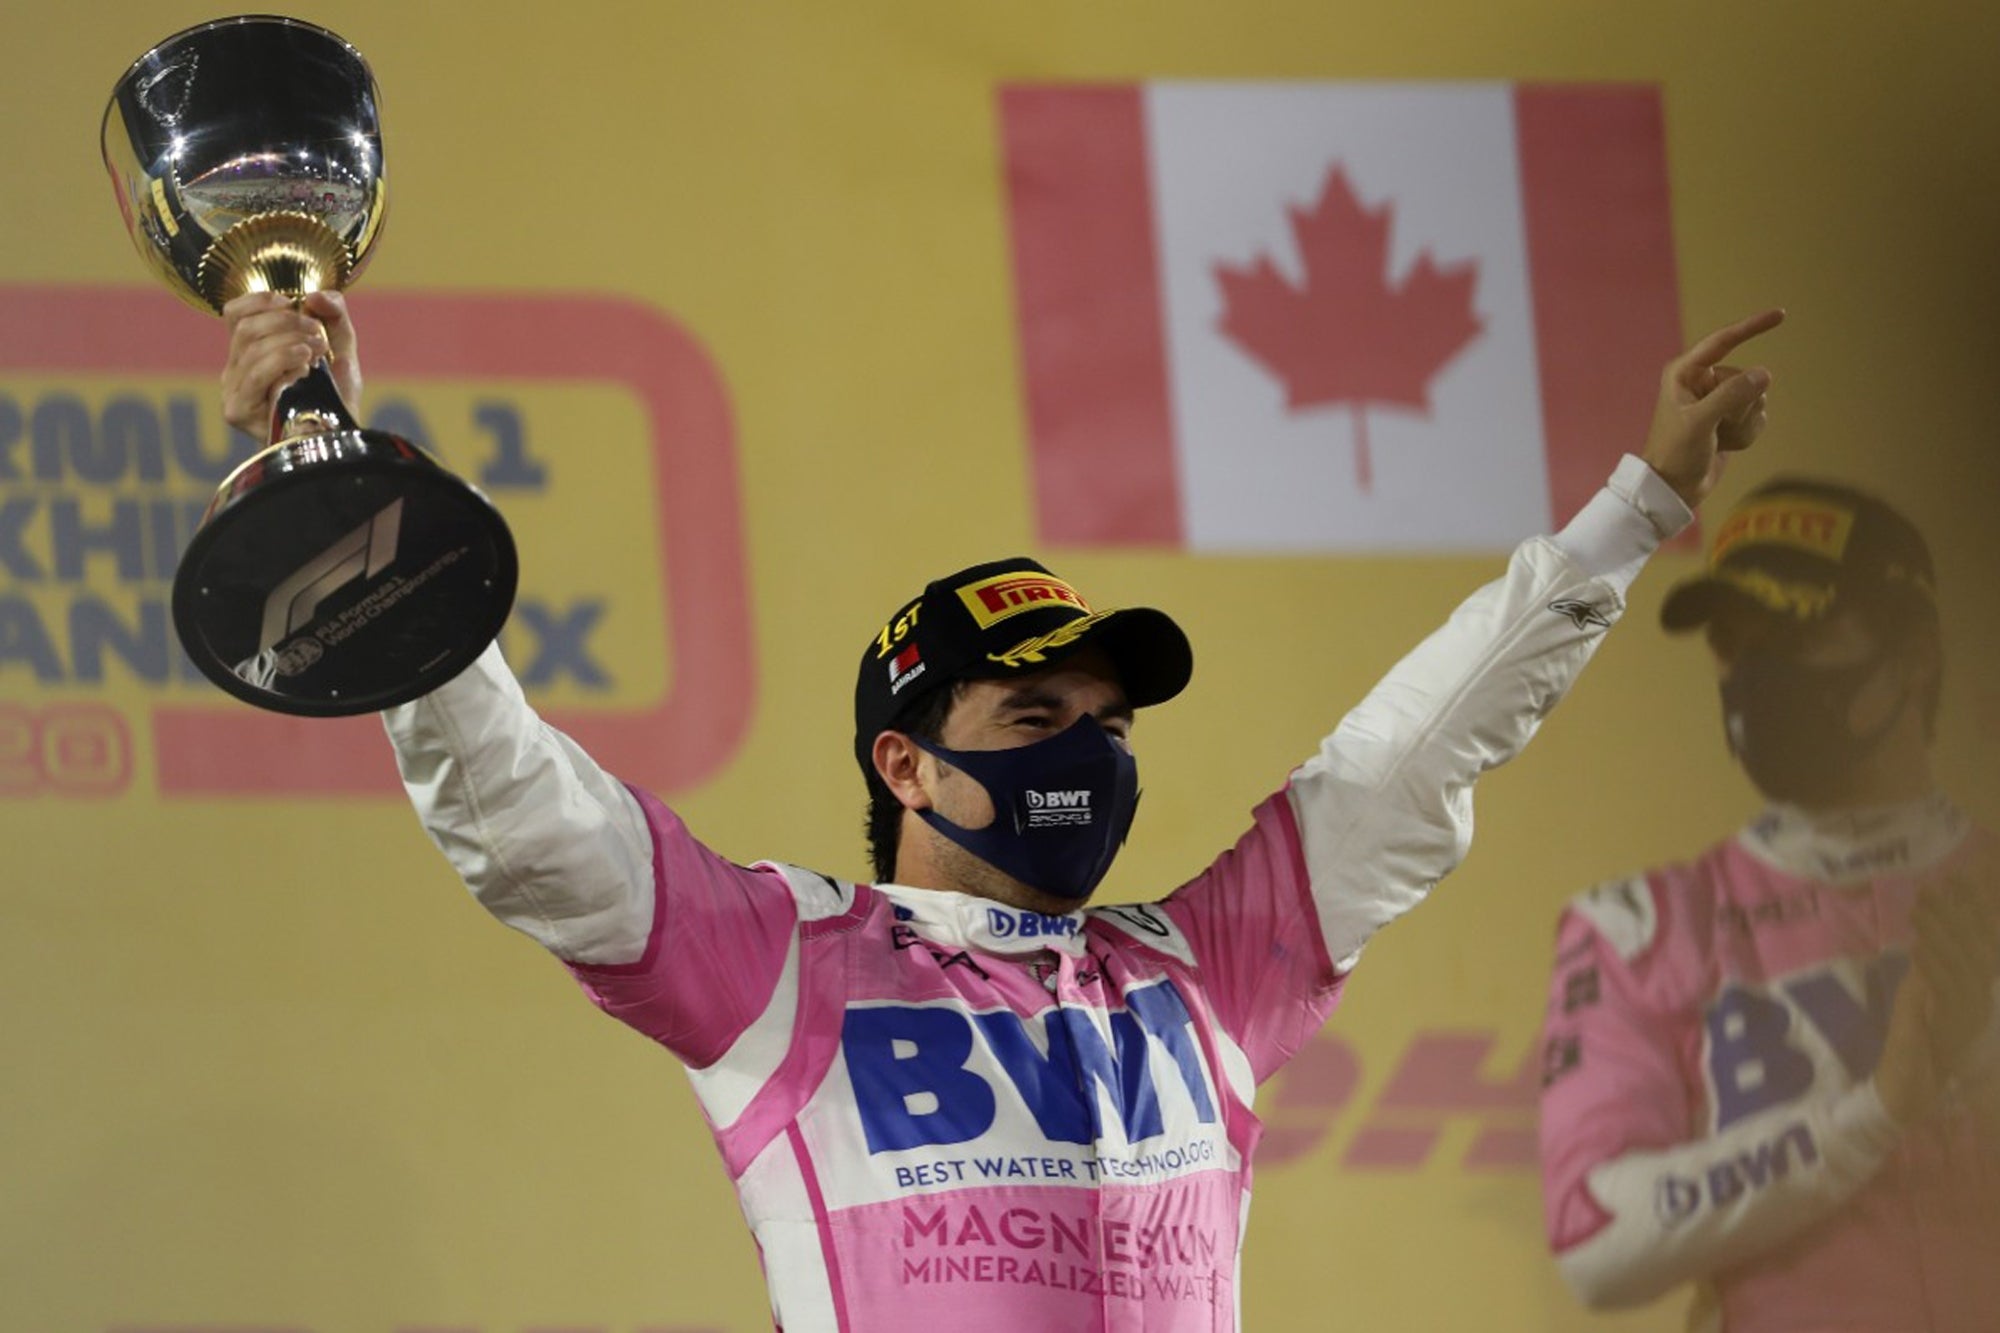 This is how Sergio 'Checo' Pérez won F1 after 10 years of trying